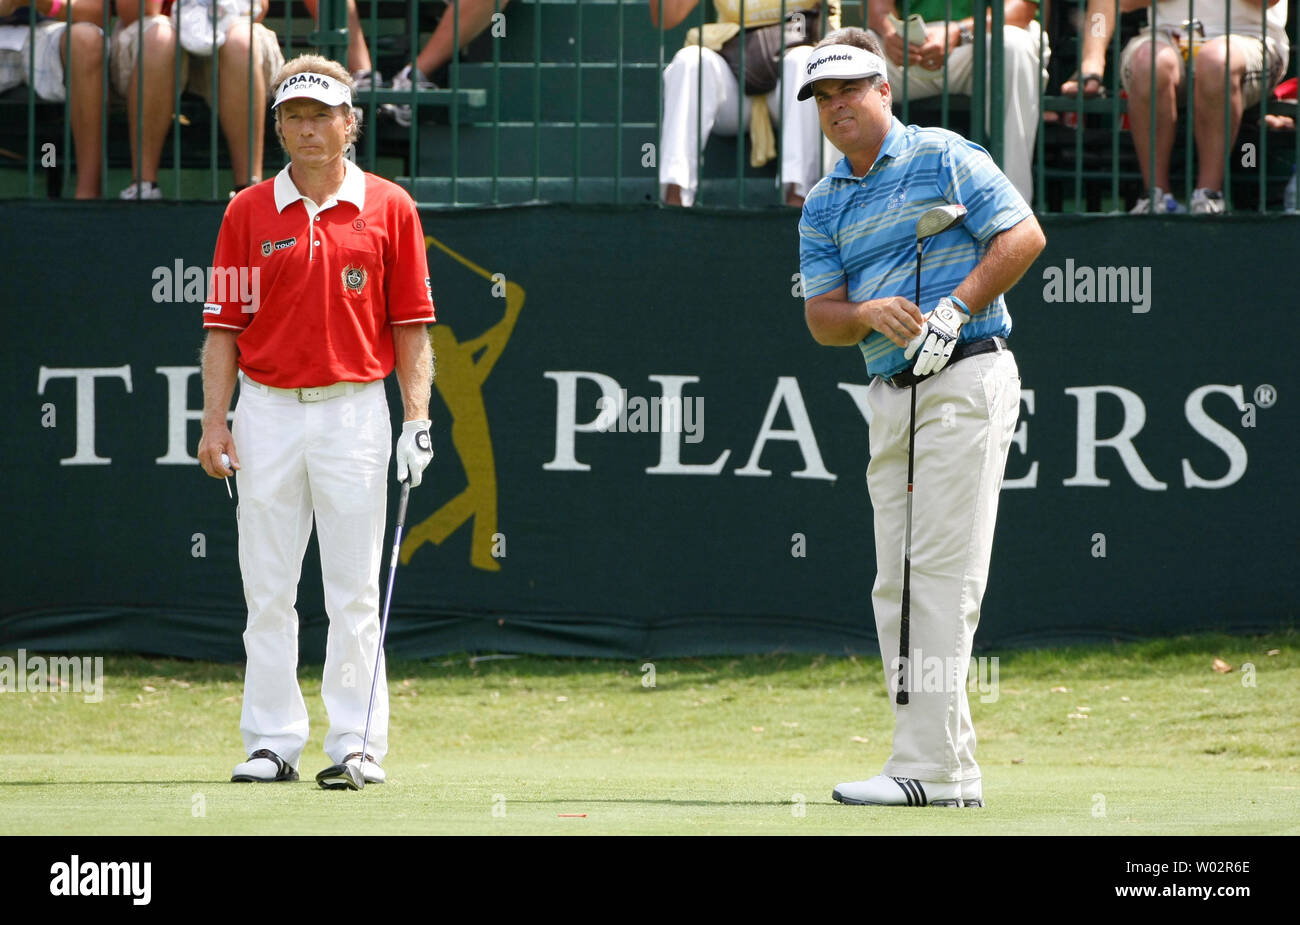 Bernhard Langer (L), from Munich, Germany, and Kenny Perry (R), from Franklin, Kentucky, watch Perry's drive from the #1 tee to start their third round of The Players Championship PGA golf tournament in Ponte Vedra Beach, Florida on May 10, 2008 .   (UPI Photo/Mark Wallheiser) Stock Photo